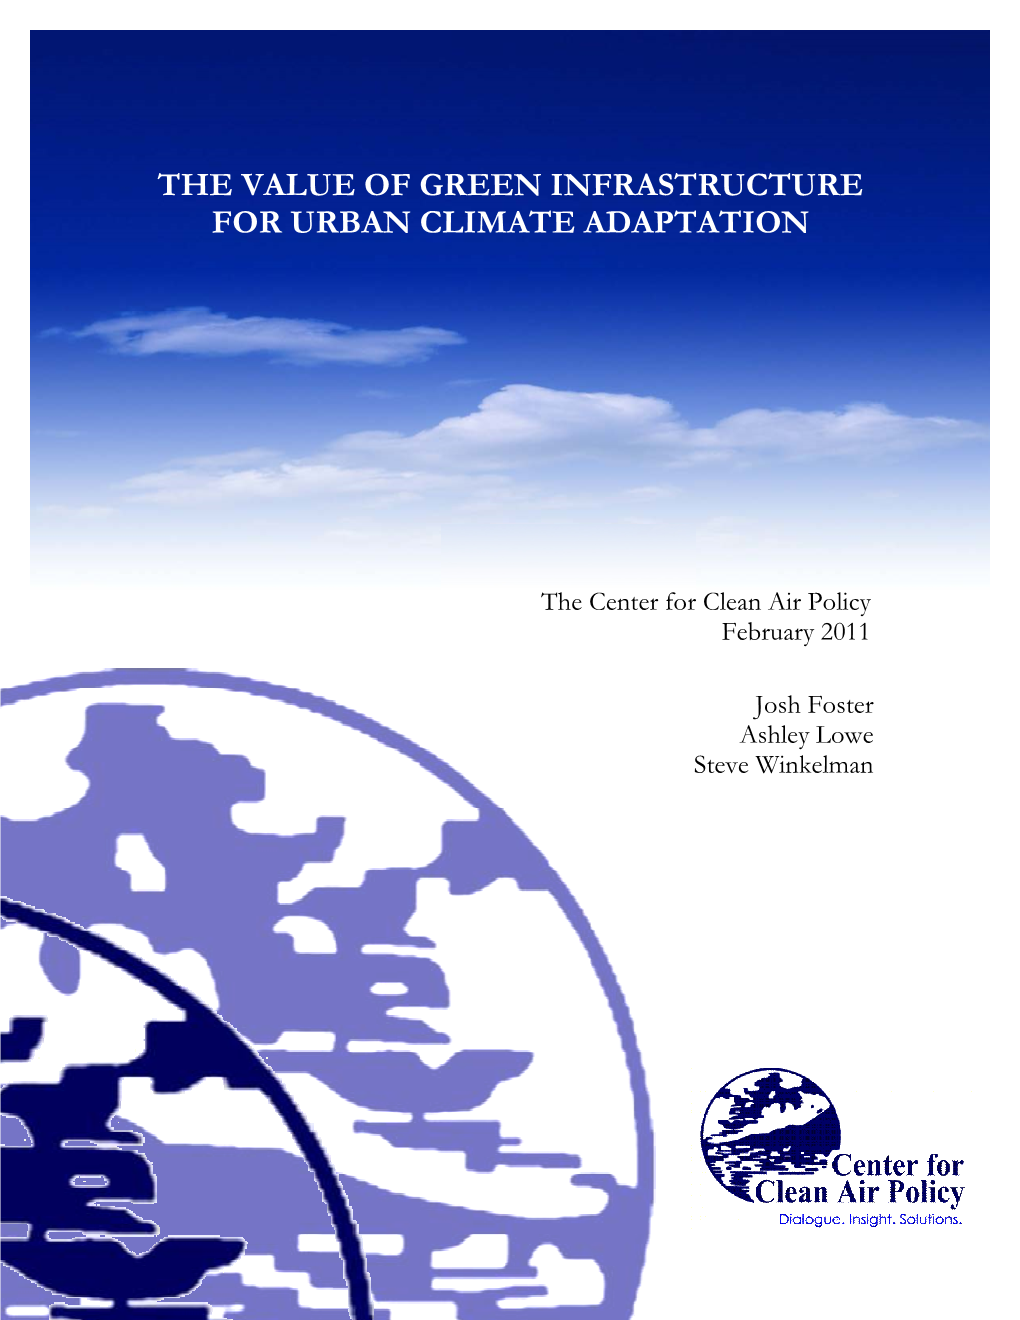 The Value of Green Infrastructure for Urban Climate Adaptation